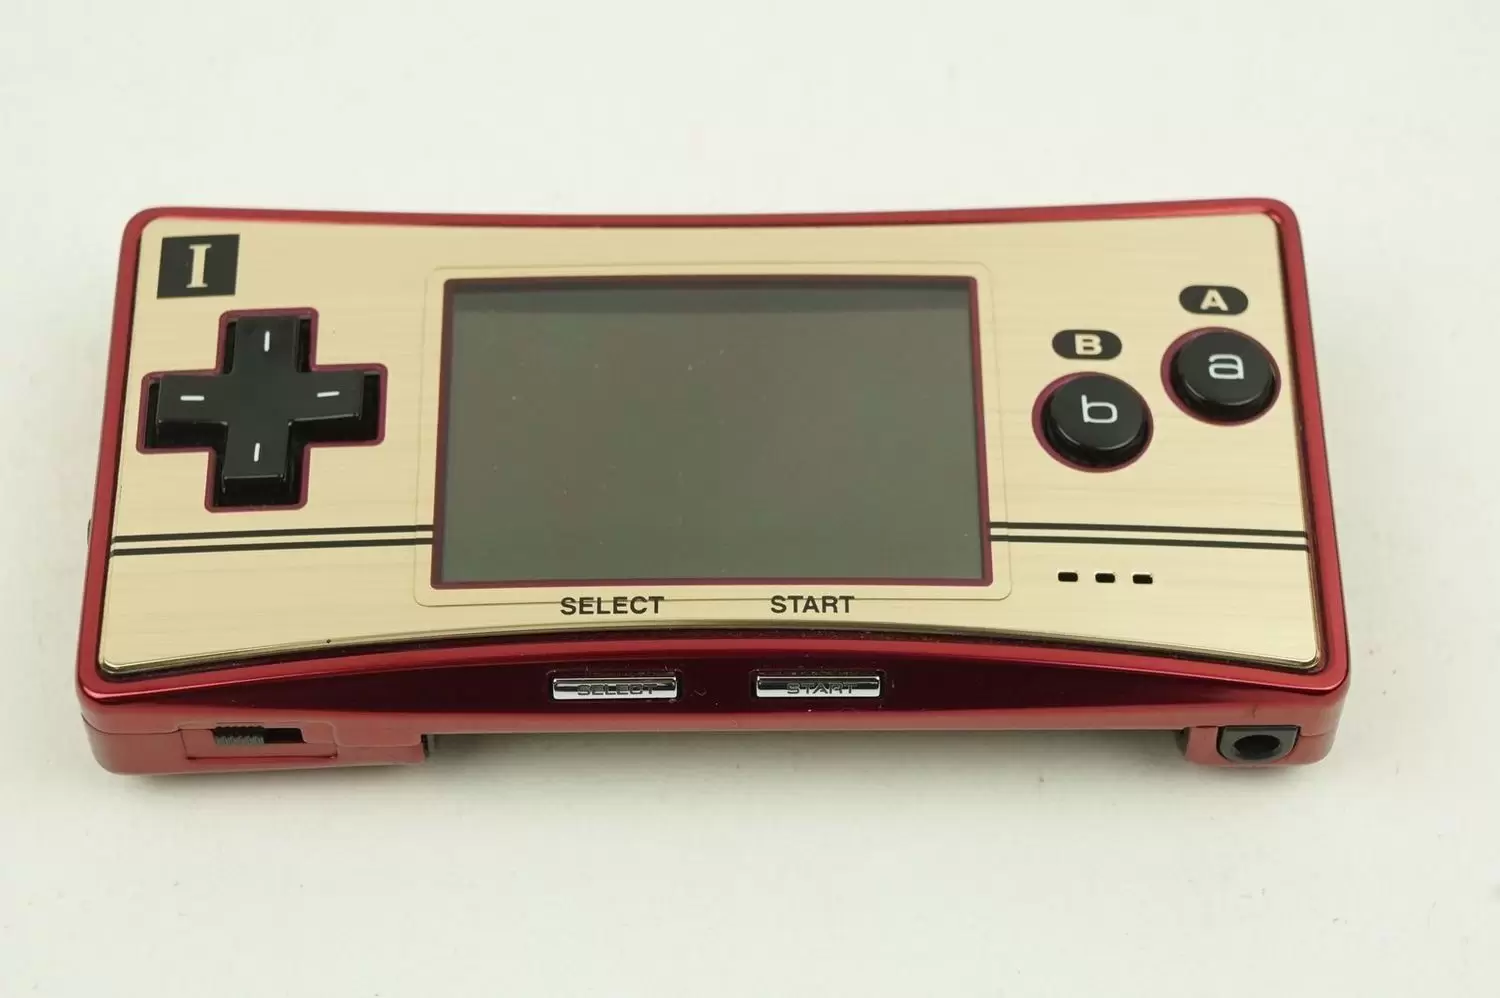 Game Boy Micro - Game Boy Micro 20th Anniversary Edition - Red with Gold Faceplate